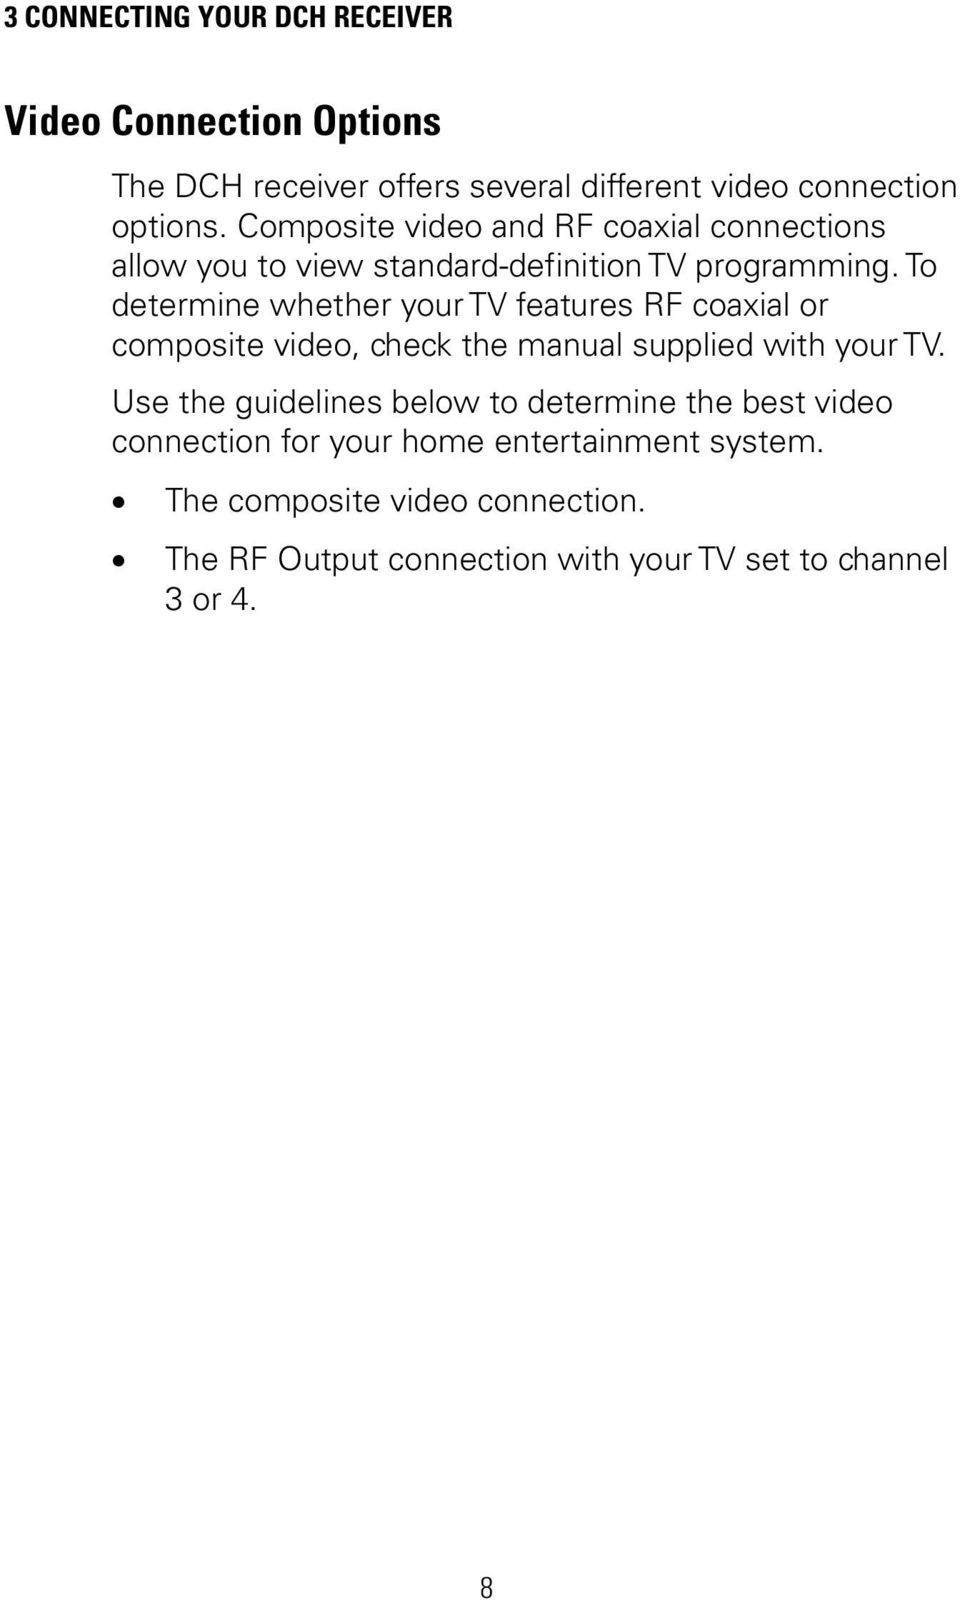 To determine whether your TV features RF coaxial or composite video, check the manual supplied with your TV.